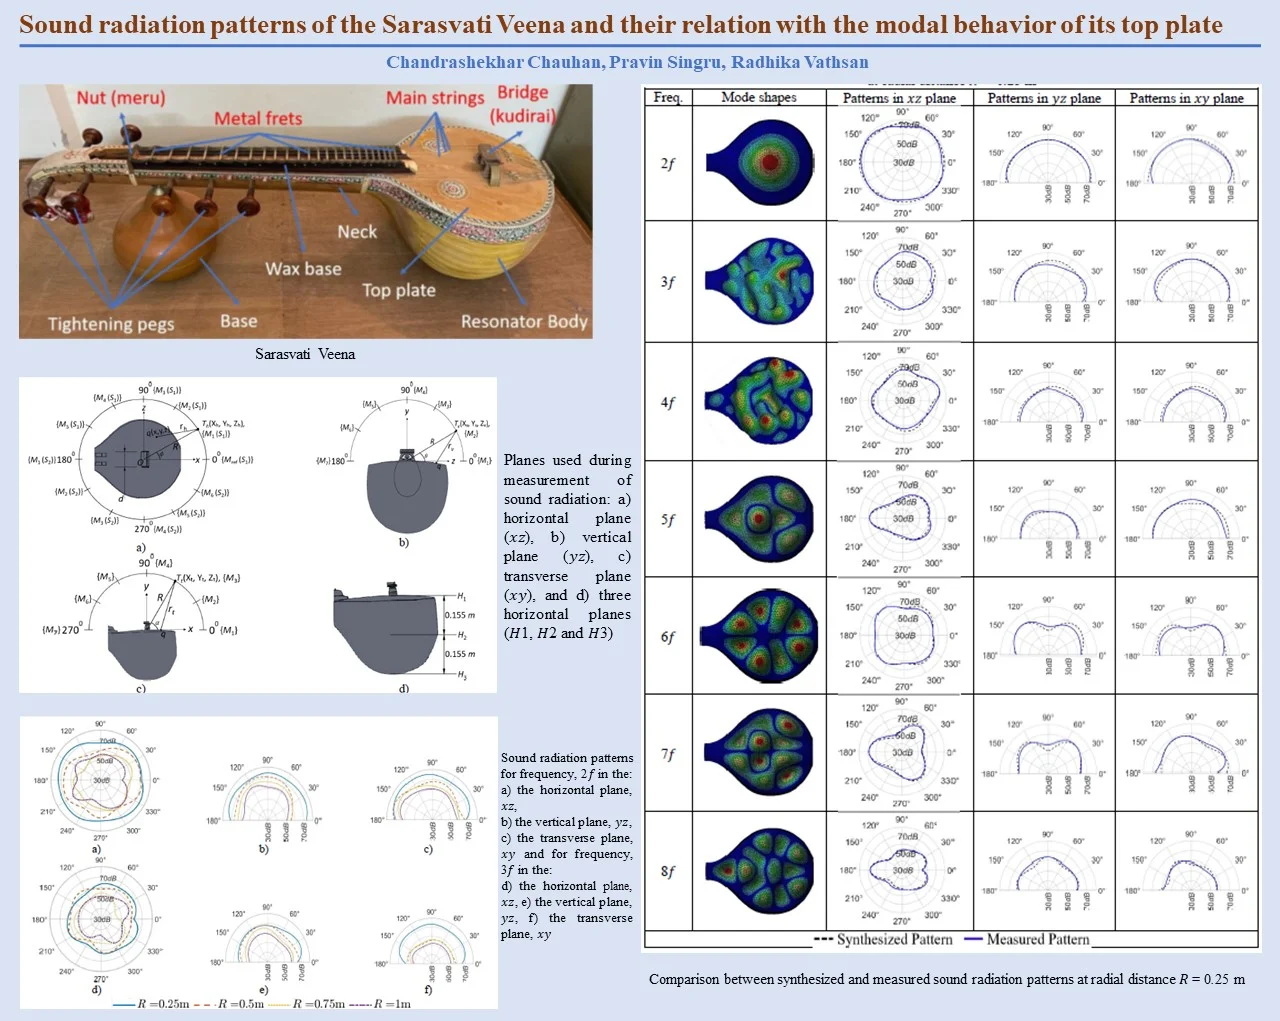 Sound radiation patterns of the Sarasvati Veena and their relation with the modal behavior of its top plate